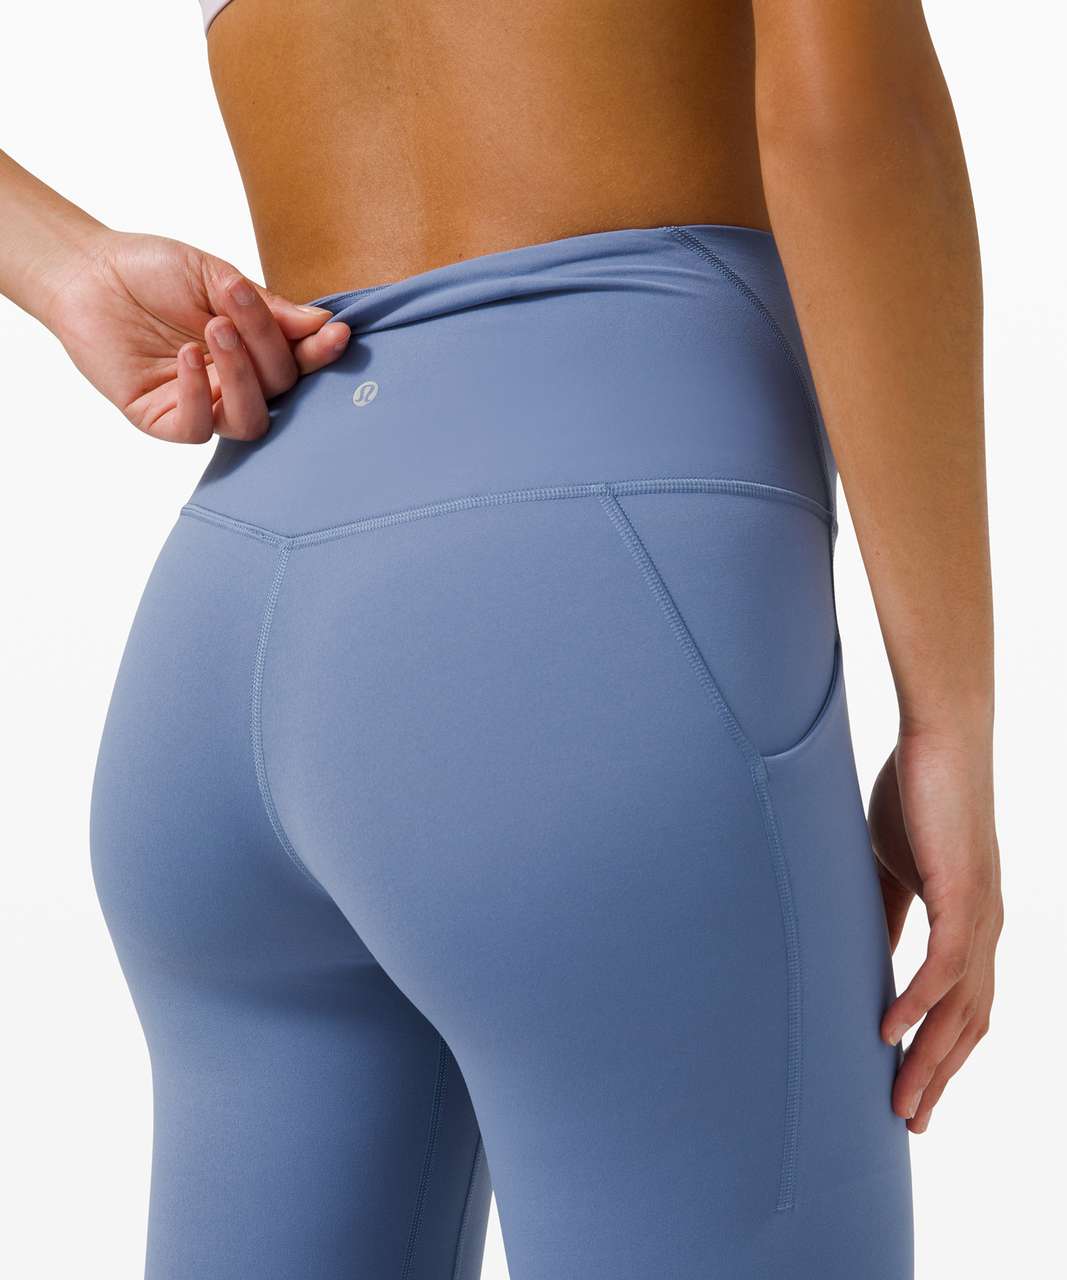 Lululemon Align High Rise Pant with Pockets 25" - Water Drop